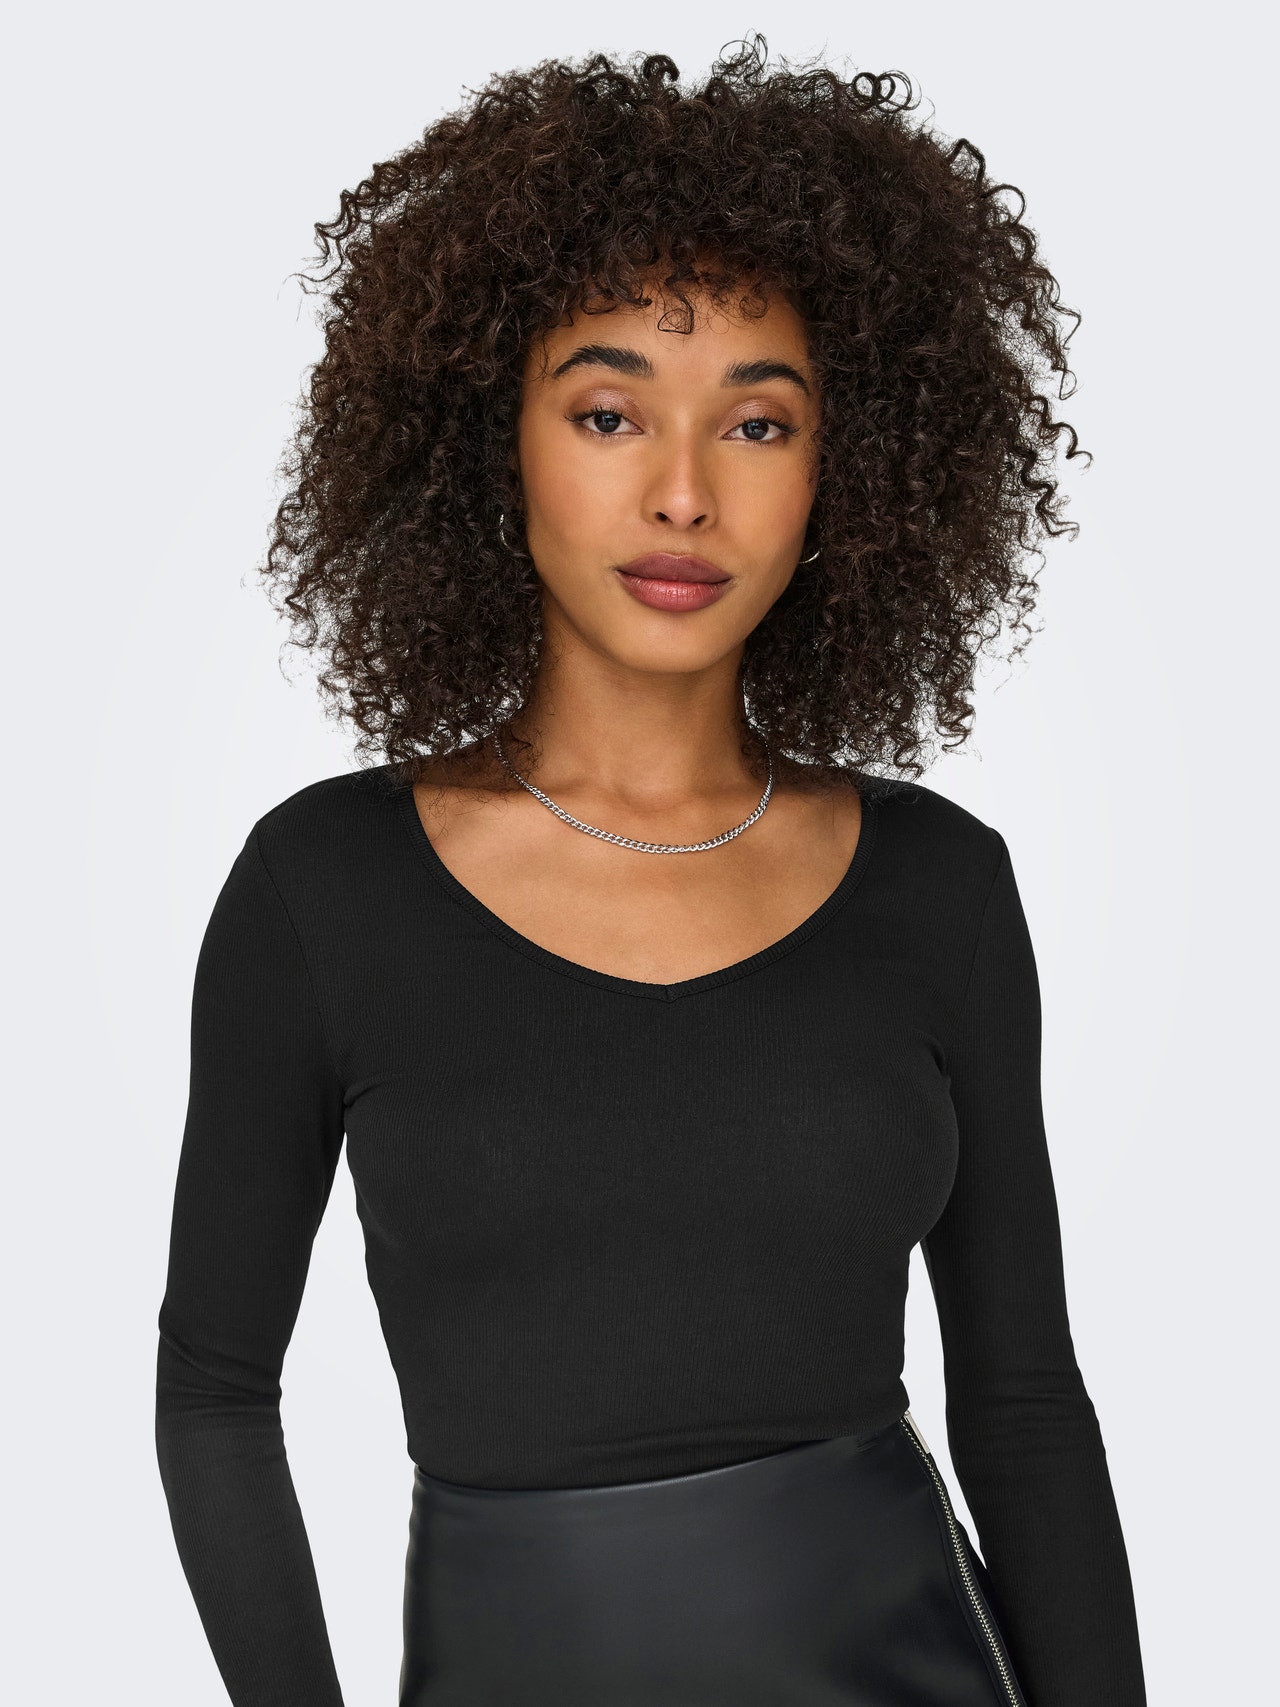 ONLY Tight Fit Round Neck T-Shirt -Black - 15290845